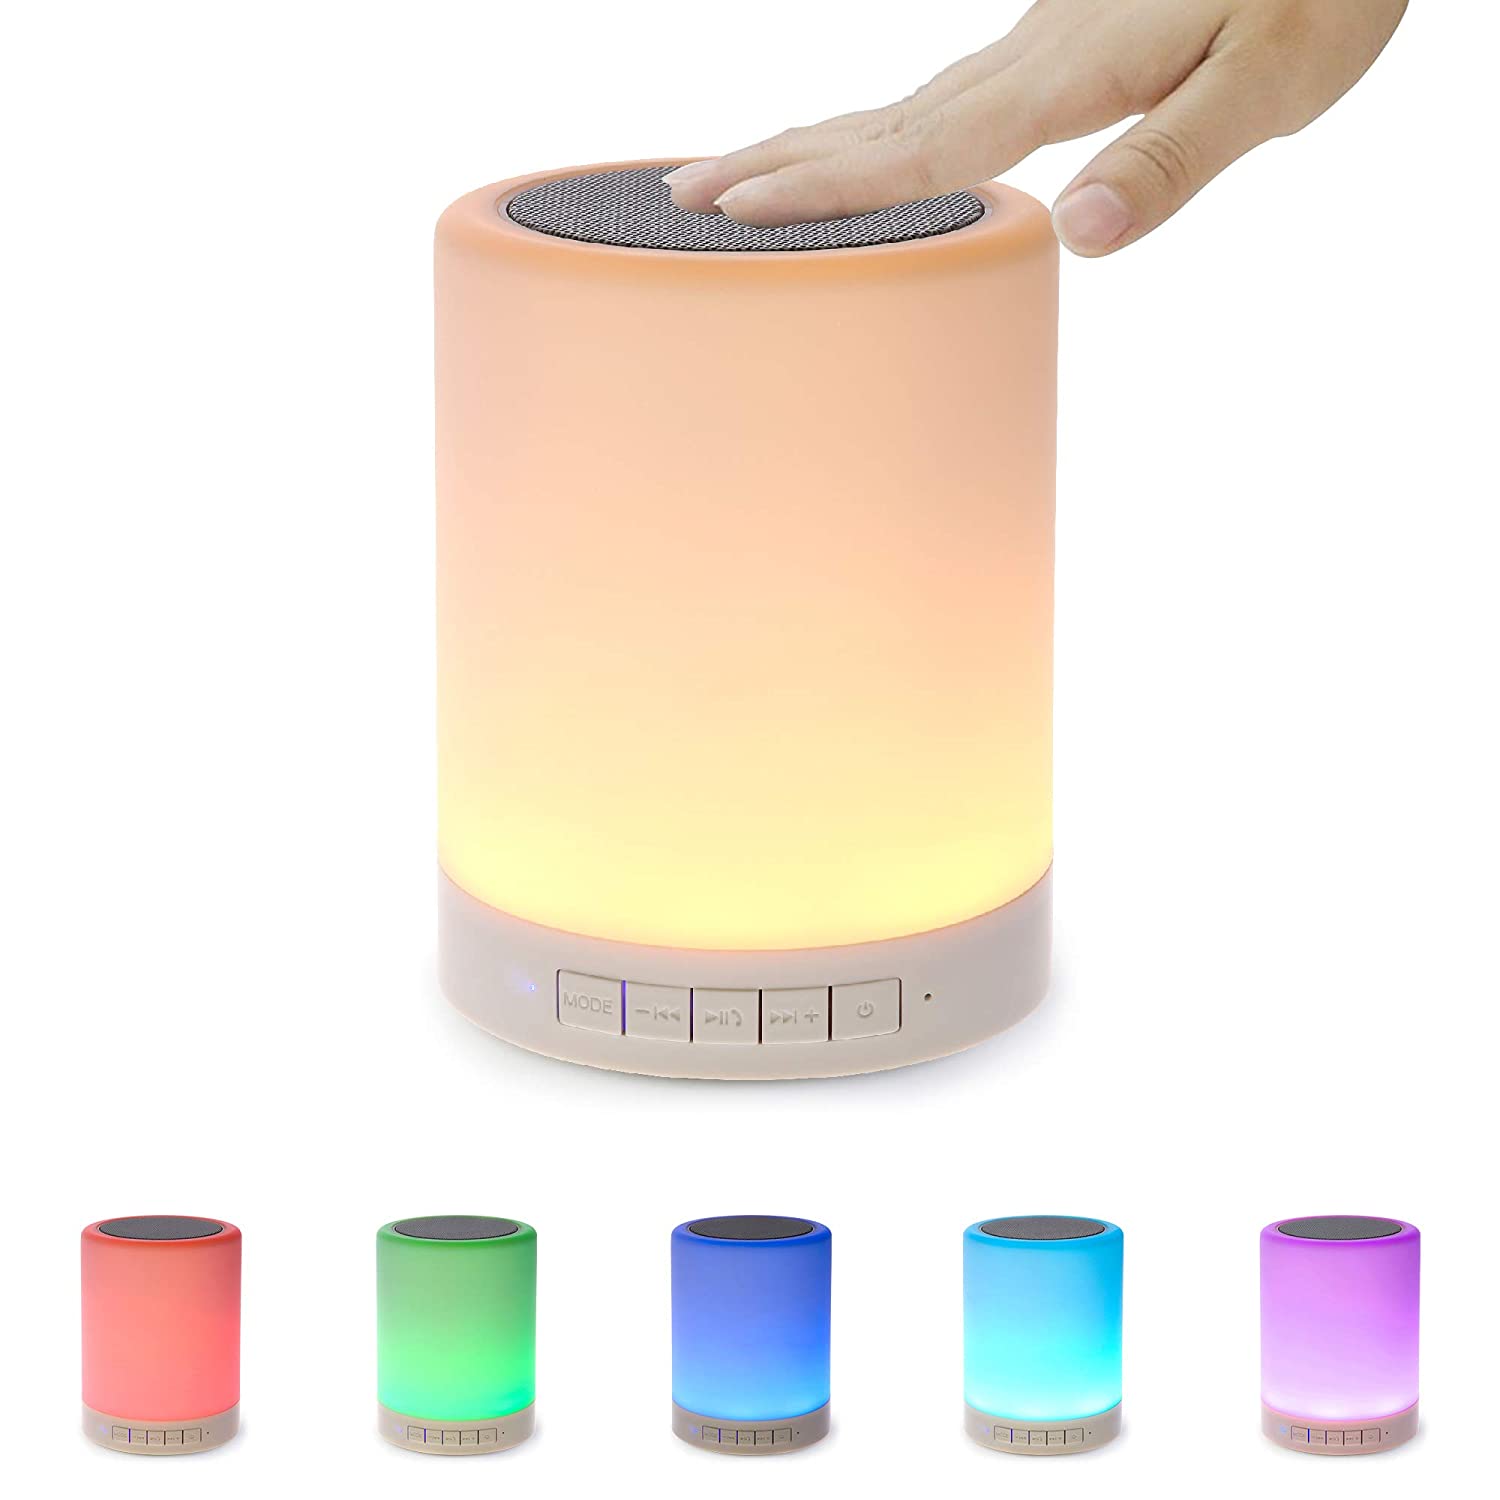 MOOD LAMP Wireless Bluetooth Speakers,Portable Multifunctional Bluetooth Speaker with Smart Touch LED Mood Lamp, Music Player / Hands-free Bluetooth Speakerphone, TF card / AUX supported, White